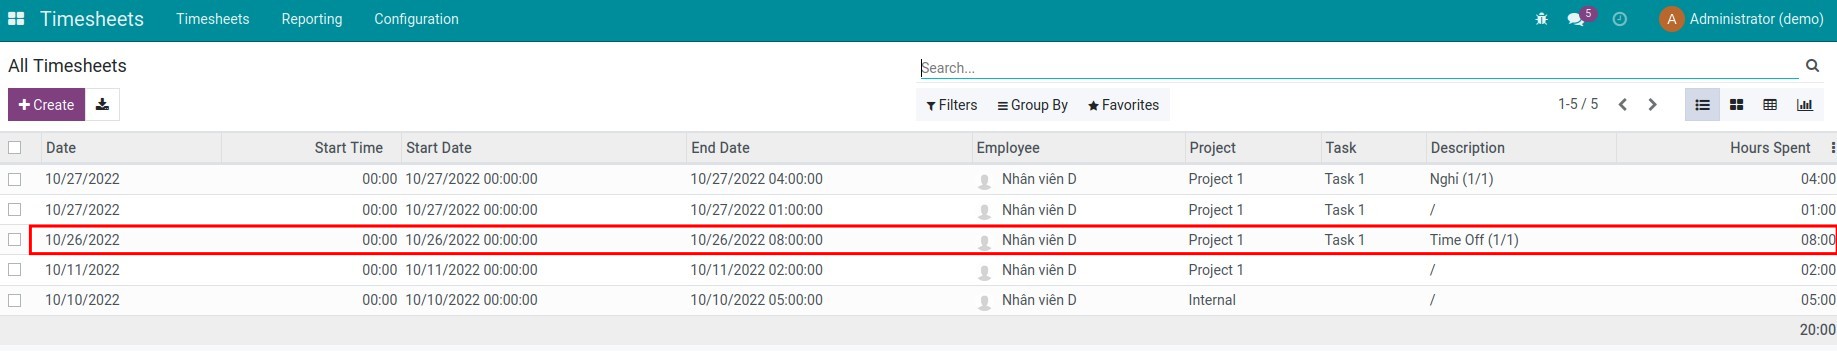 The Time off timesheet records generated from the time off requests - Exclude Time off Timesheet records on Viindoo Payslip